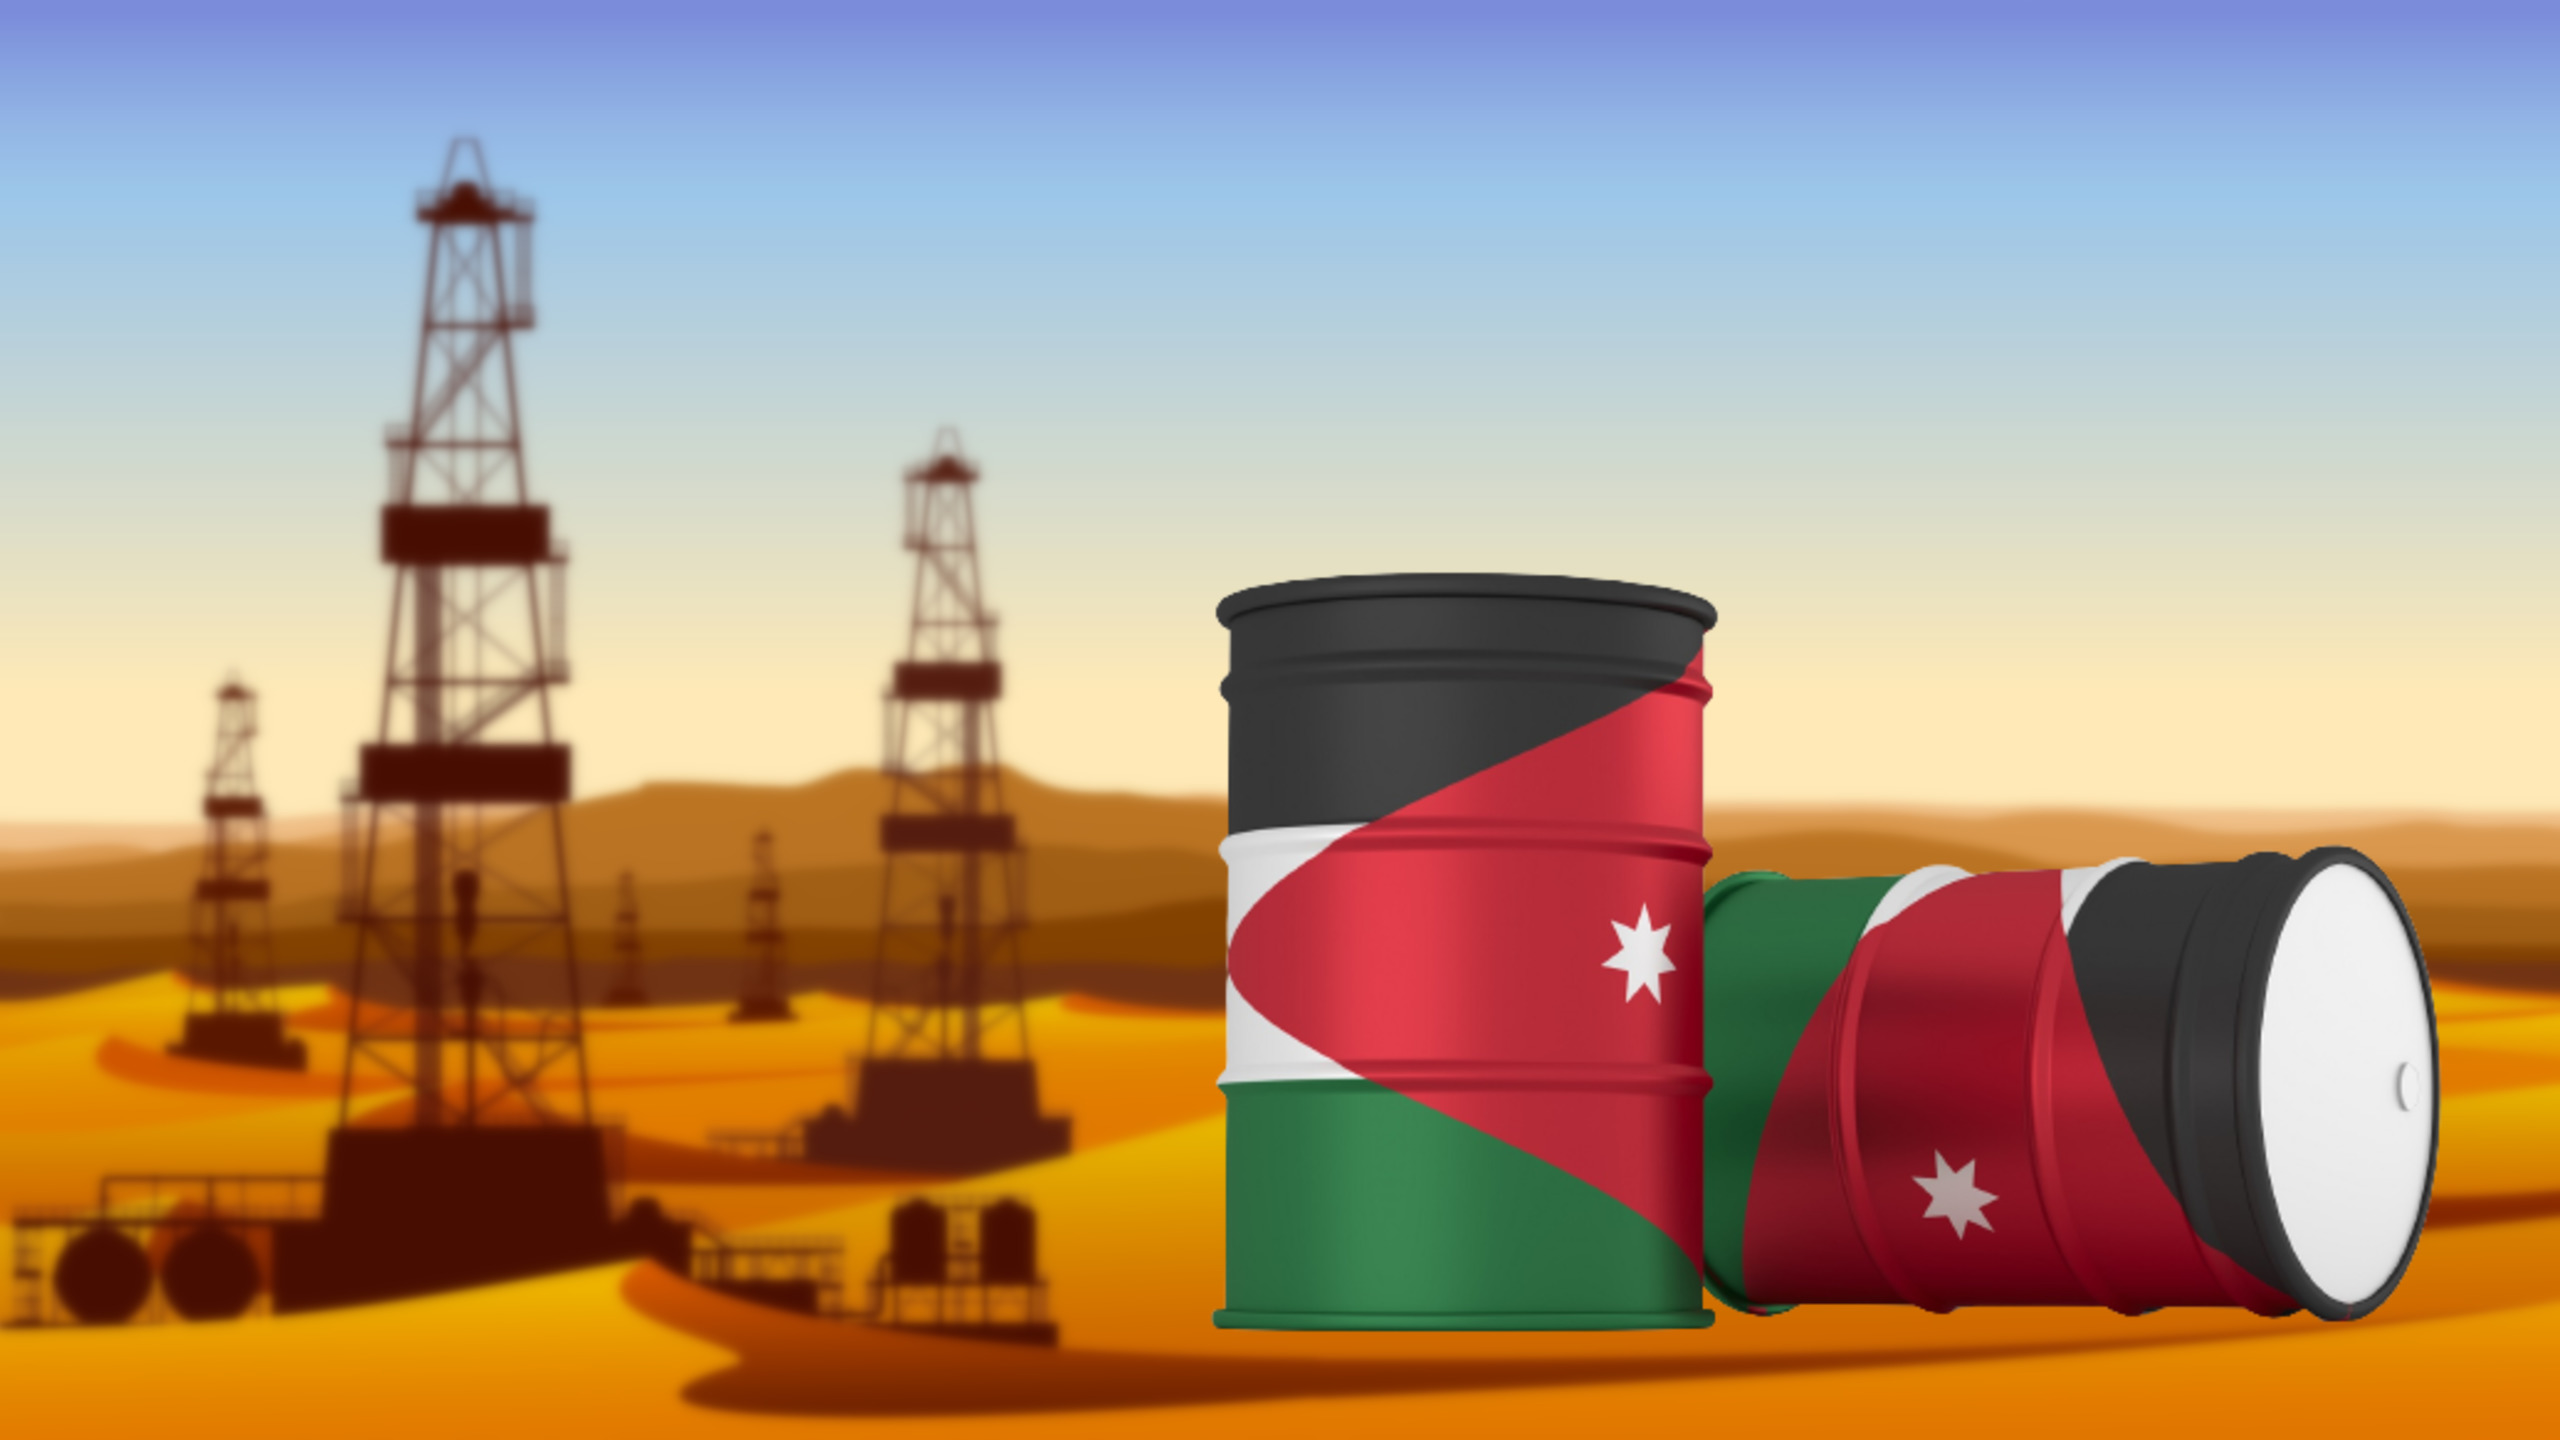 Jordan To Drill for Oil in Country’s Southeast Region